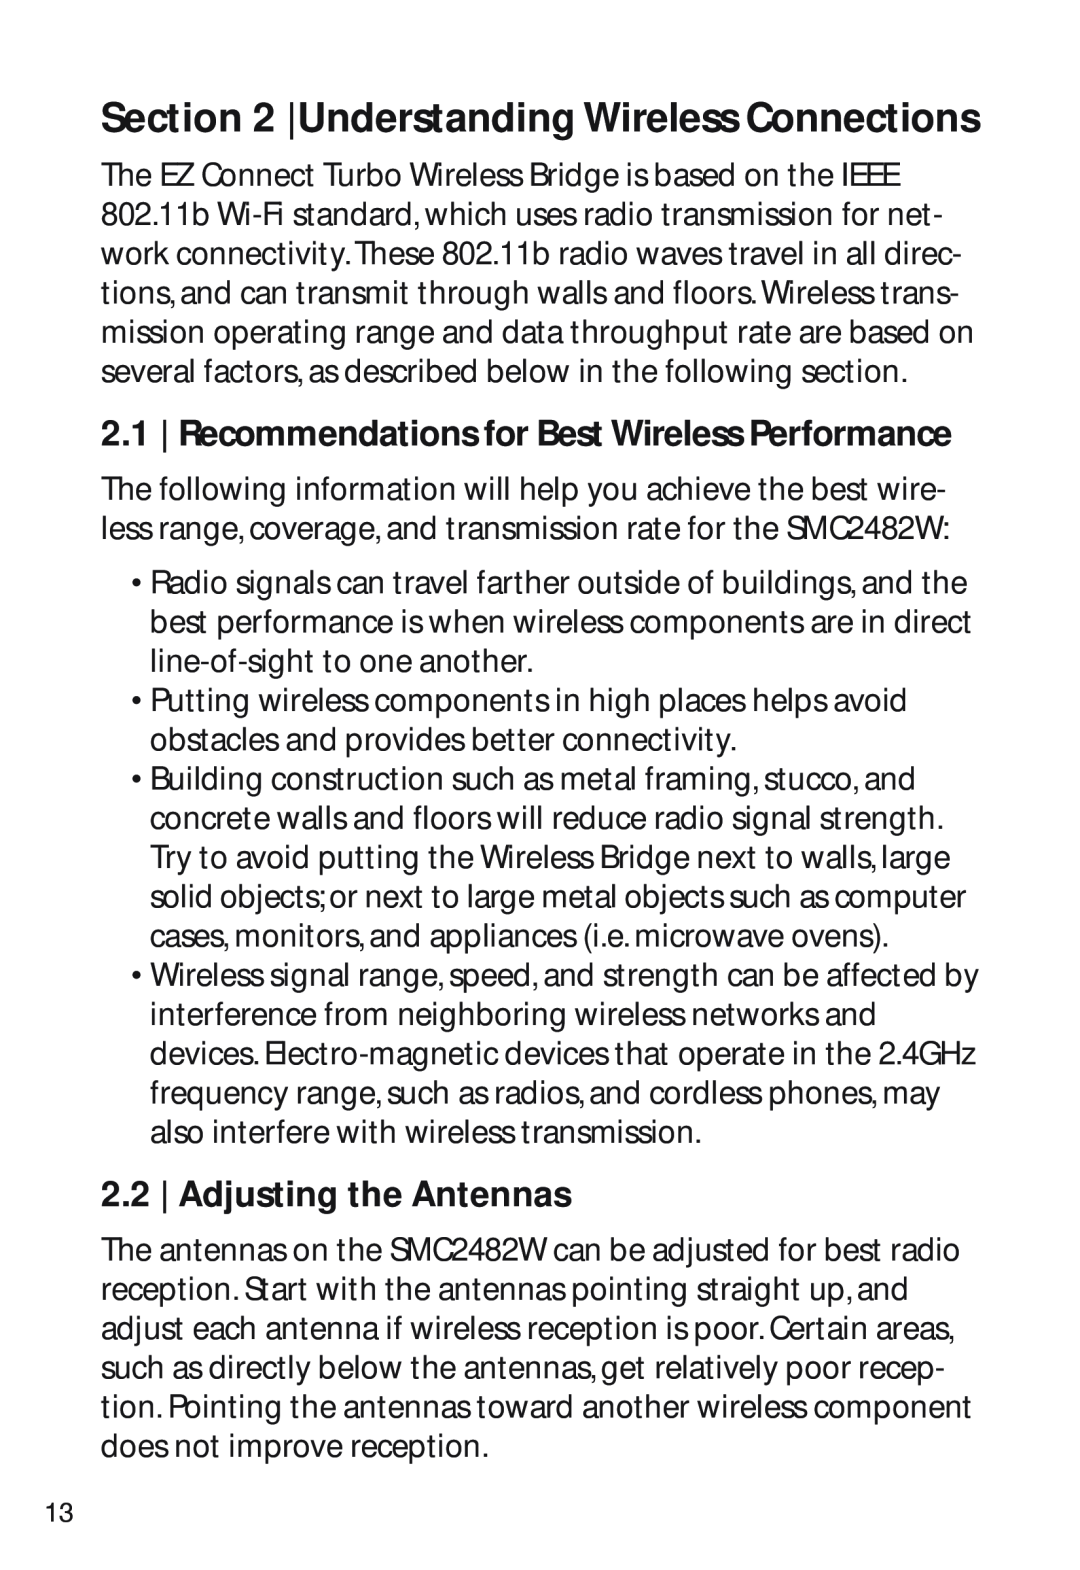 SMC Networks SMC2482W manual Understanding Wireless Connections, Recommendations for Best Wireless Performance 